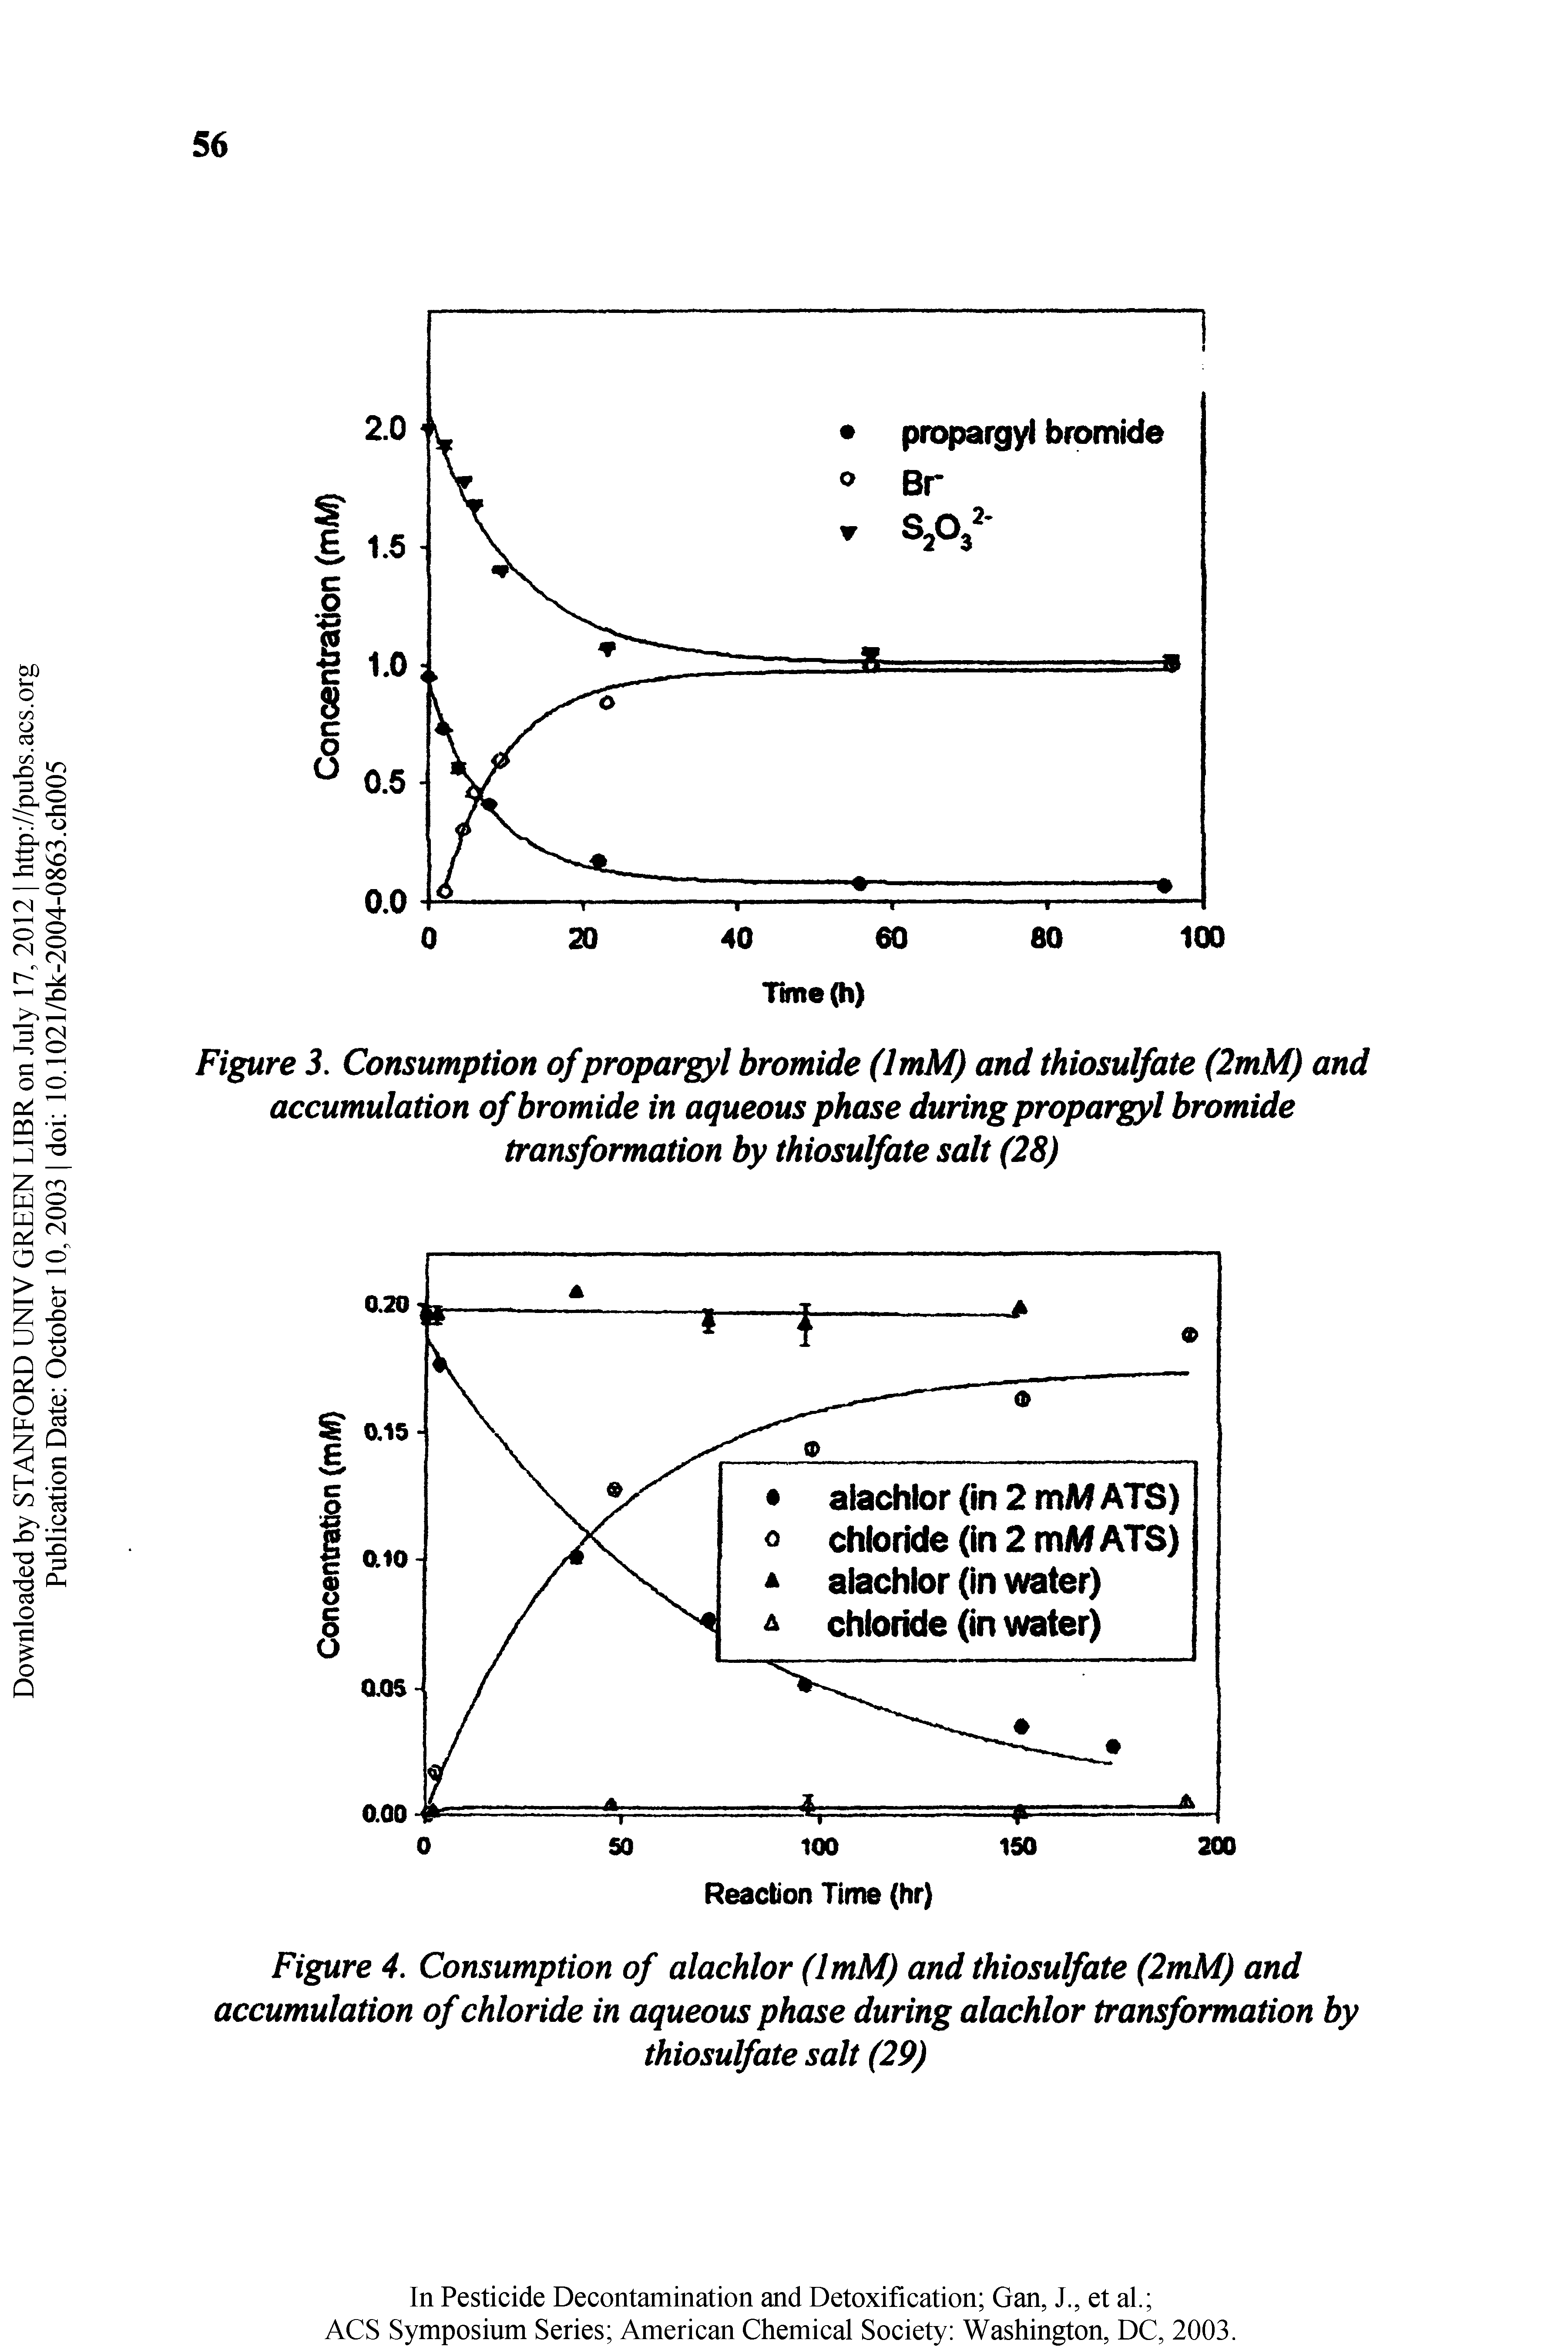 Figure 3. Consumption of propargyl bromide (ImM) and thiosulfate (2mM) and accumulation of bromide in aqueous phase during propargyl bromide transformation by thiosulfate salt (28)...